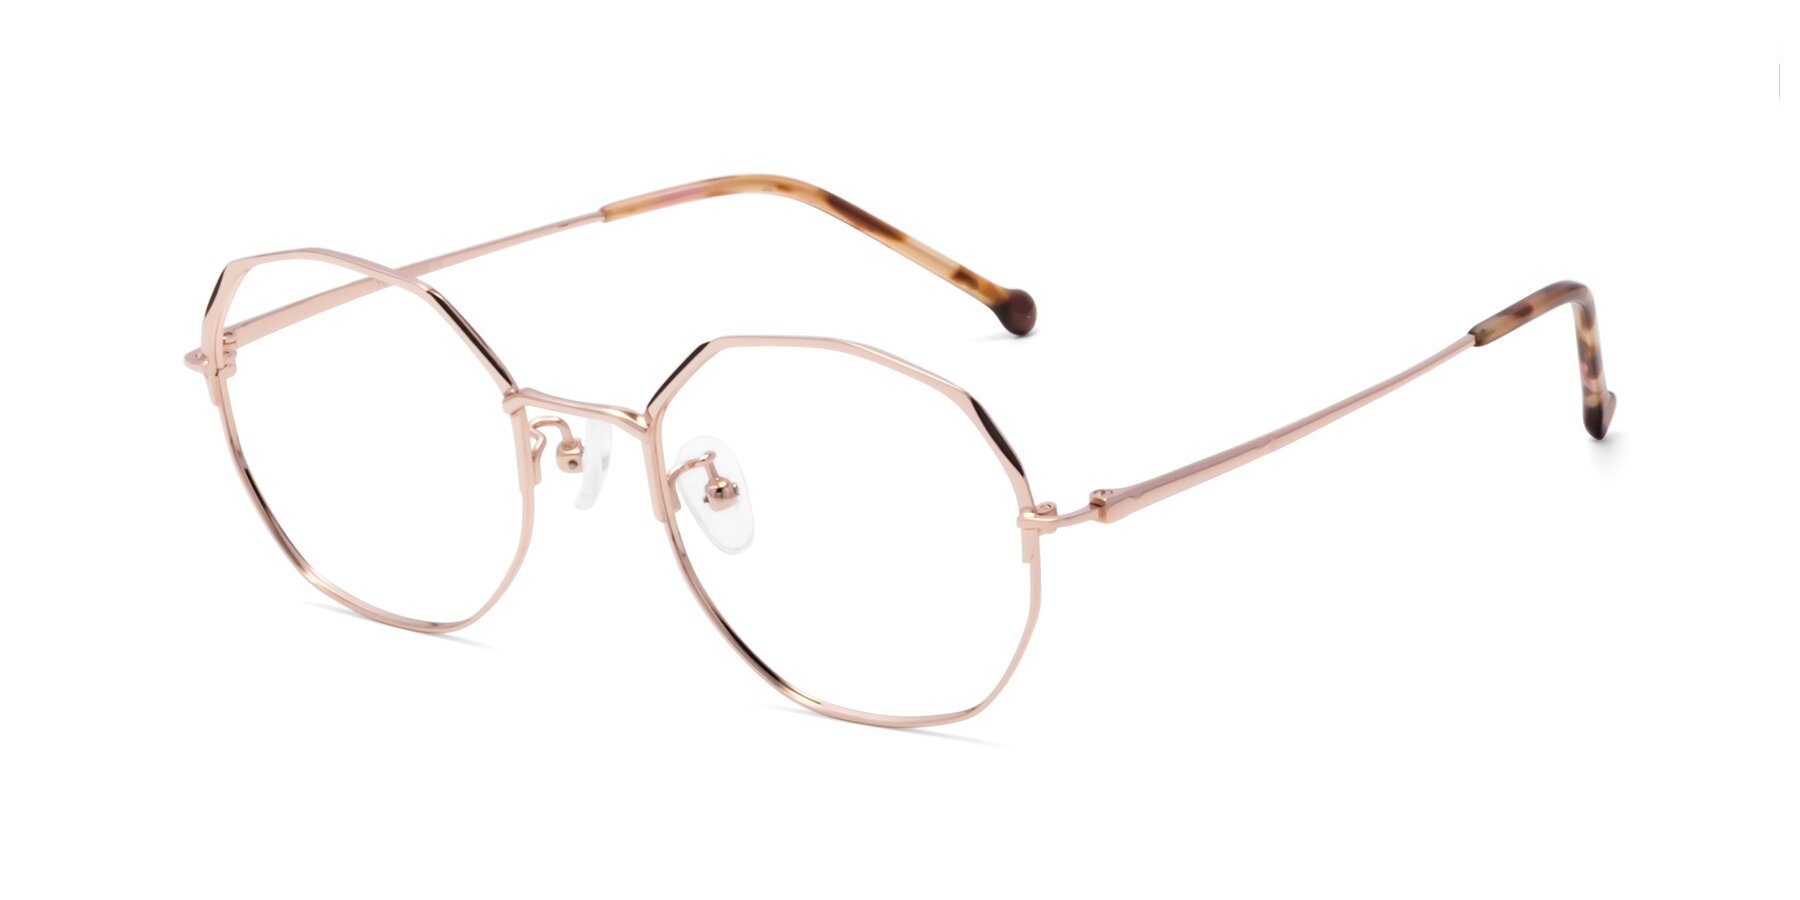 Angle of 18020 in Rose Gold with Clear Blue Light Blocking Lenses